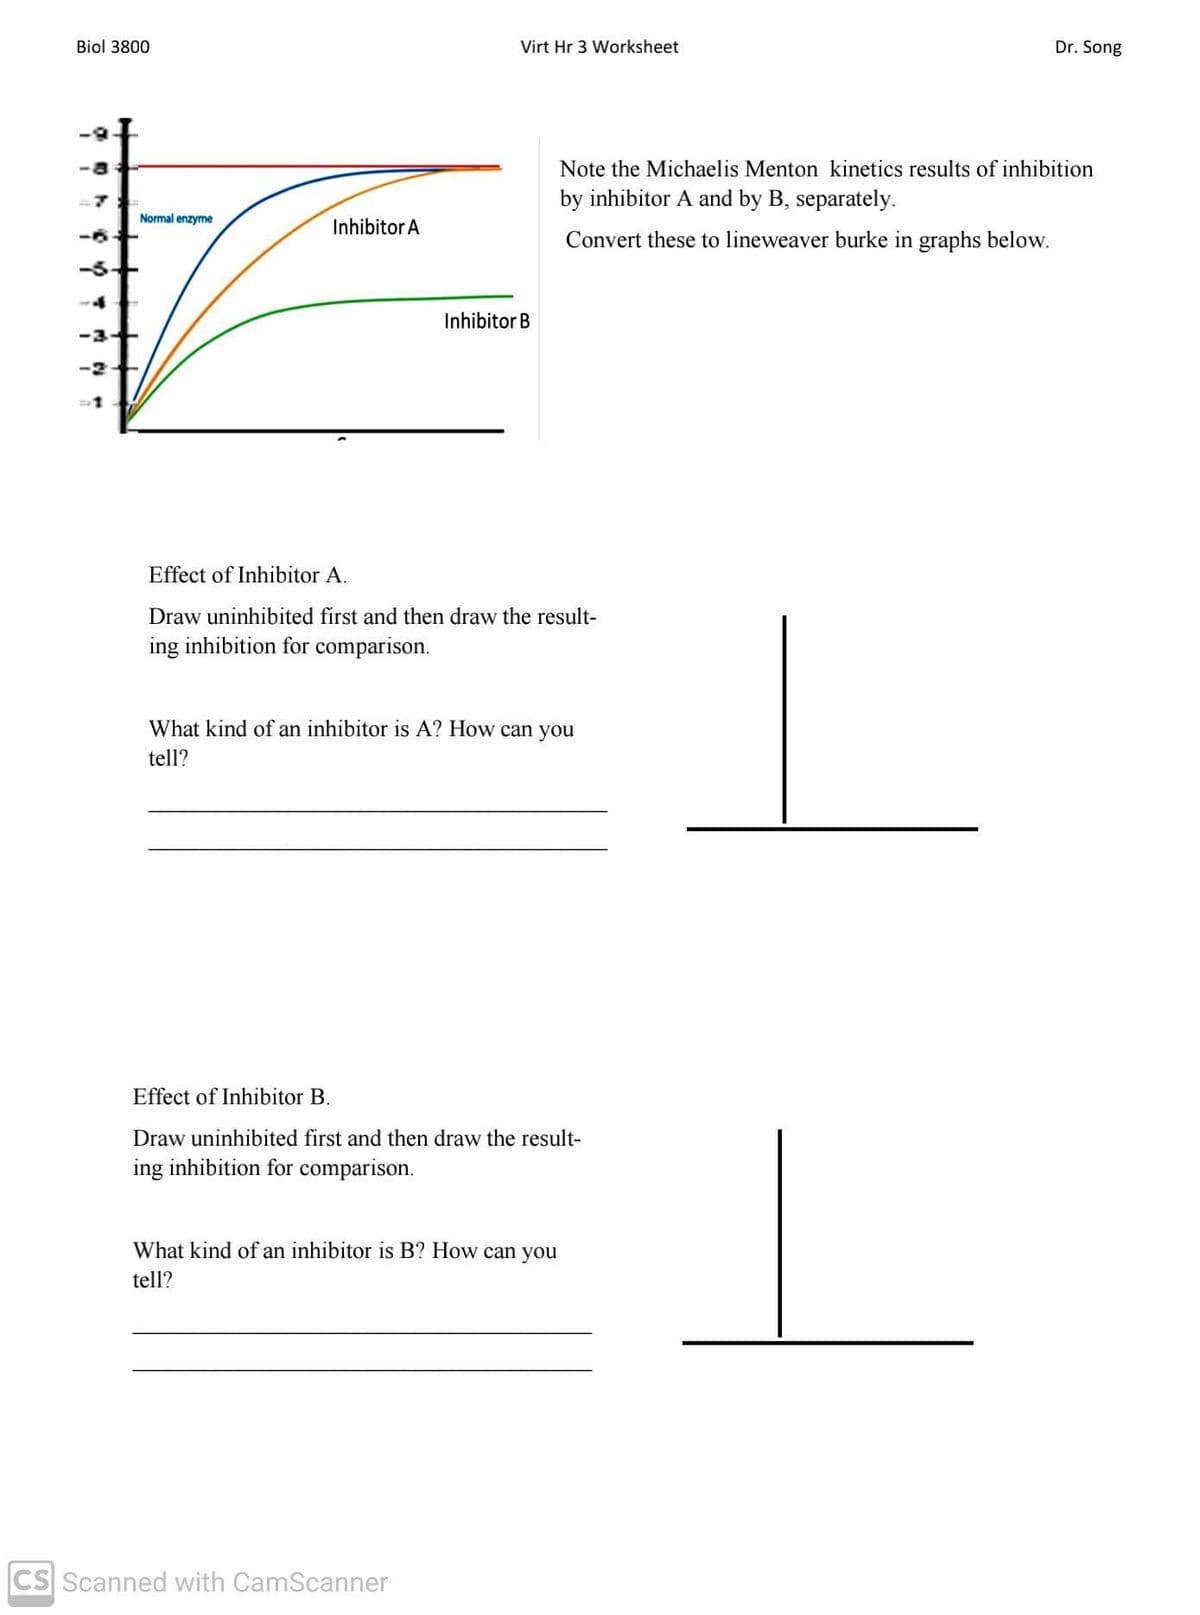 Biol 3800
Virt Hr 3 Worksheet
Dr. Song
Note the Michaelis Menton kinetics results of inhibition
by inhibitor A and by B, separately.
Normal enzyme
Inhibitor A
Convert these to lineweaver burke in graphs below.
-5-+
Inhibitor B
-3+
-2+
Effect of Inhibitor A.
Draw uninhibited first and then draw the result-
ing inhibition for comparison.
What kind of an inhibitor is A? How can you
tell?
Effect of Inhibitor B.
Draw uninhibited first and then draw the result-
ing inhibition for comparison.
What kind of an inhibitor is B? How can you
tell?
CS Scanned with CamScanner
